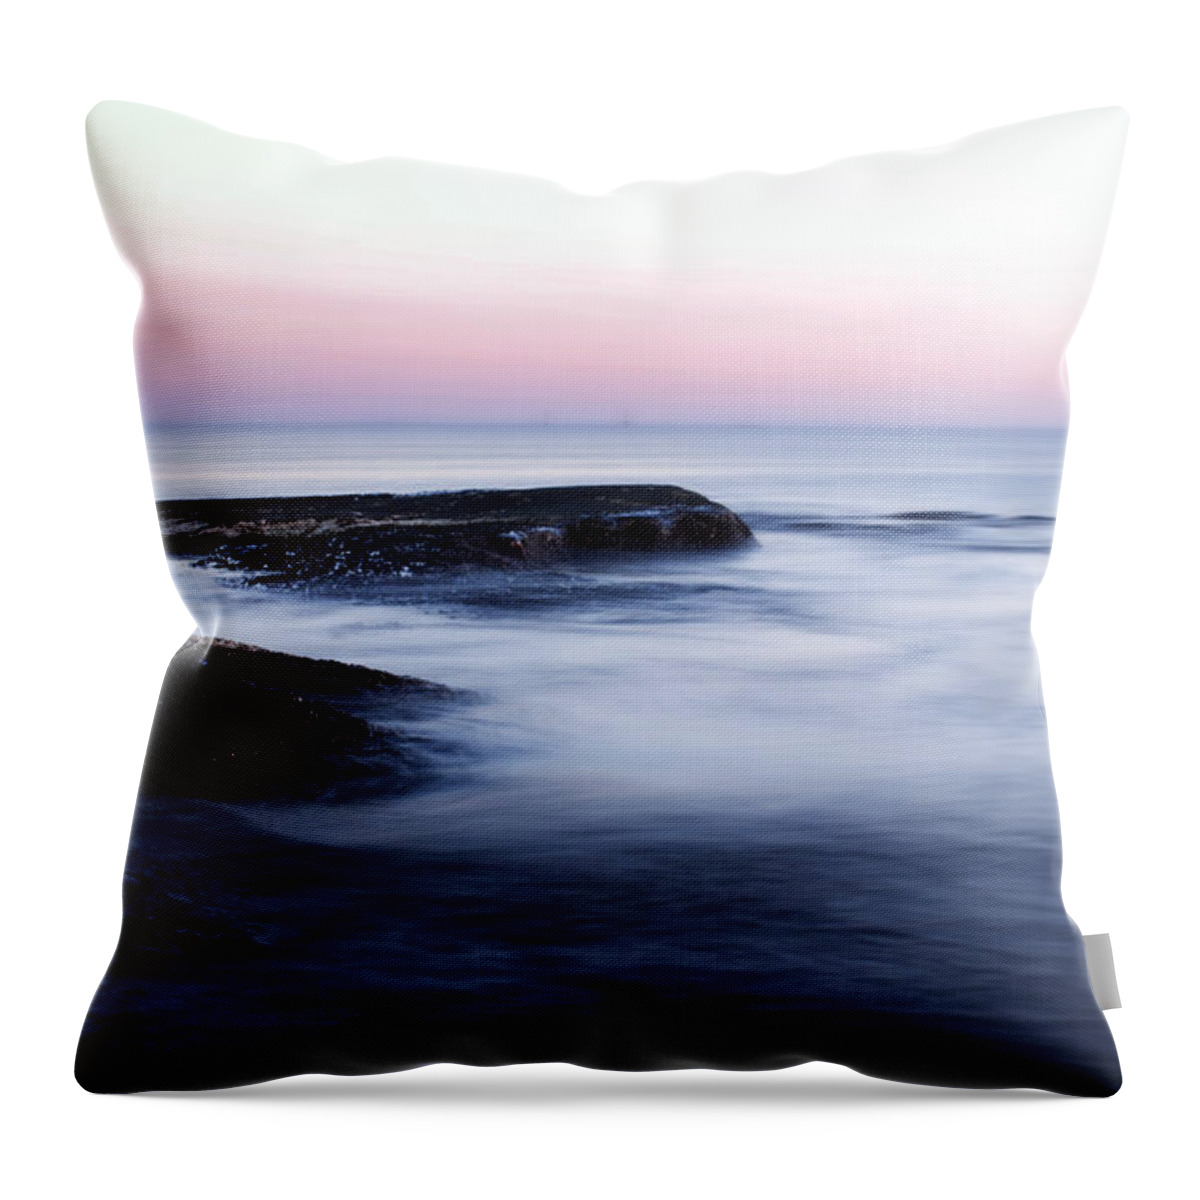 Landscape Throw Pillow featuring the photograph Misty Sea by Nicklas Gustafsson